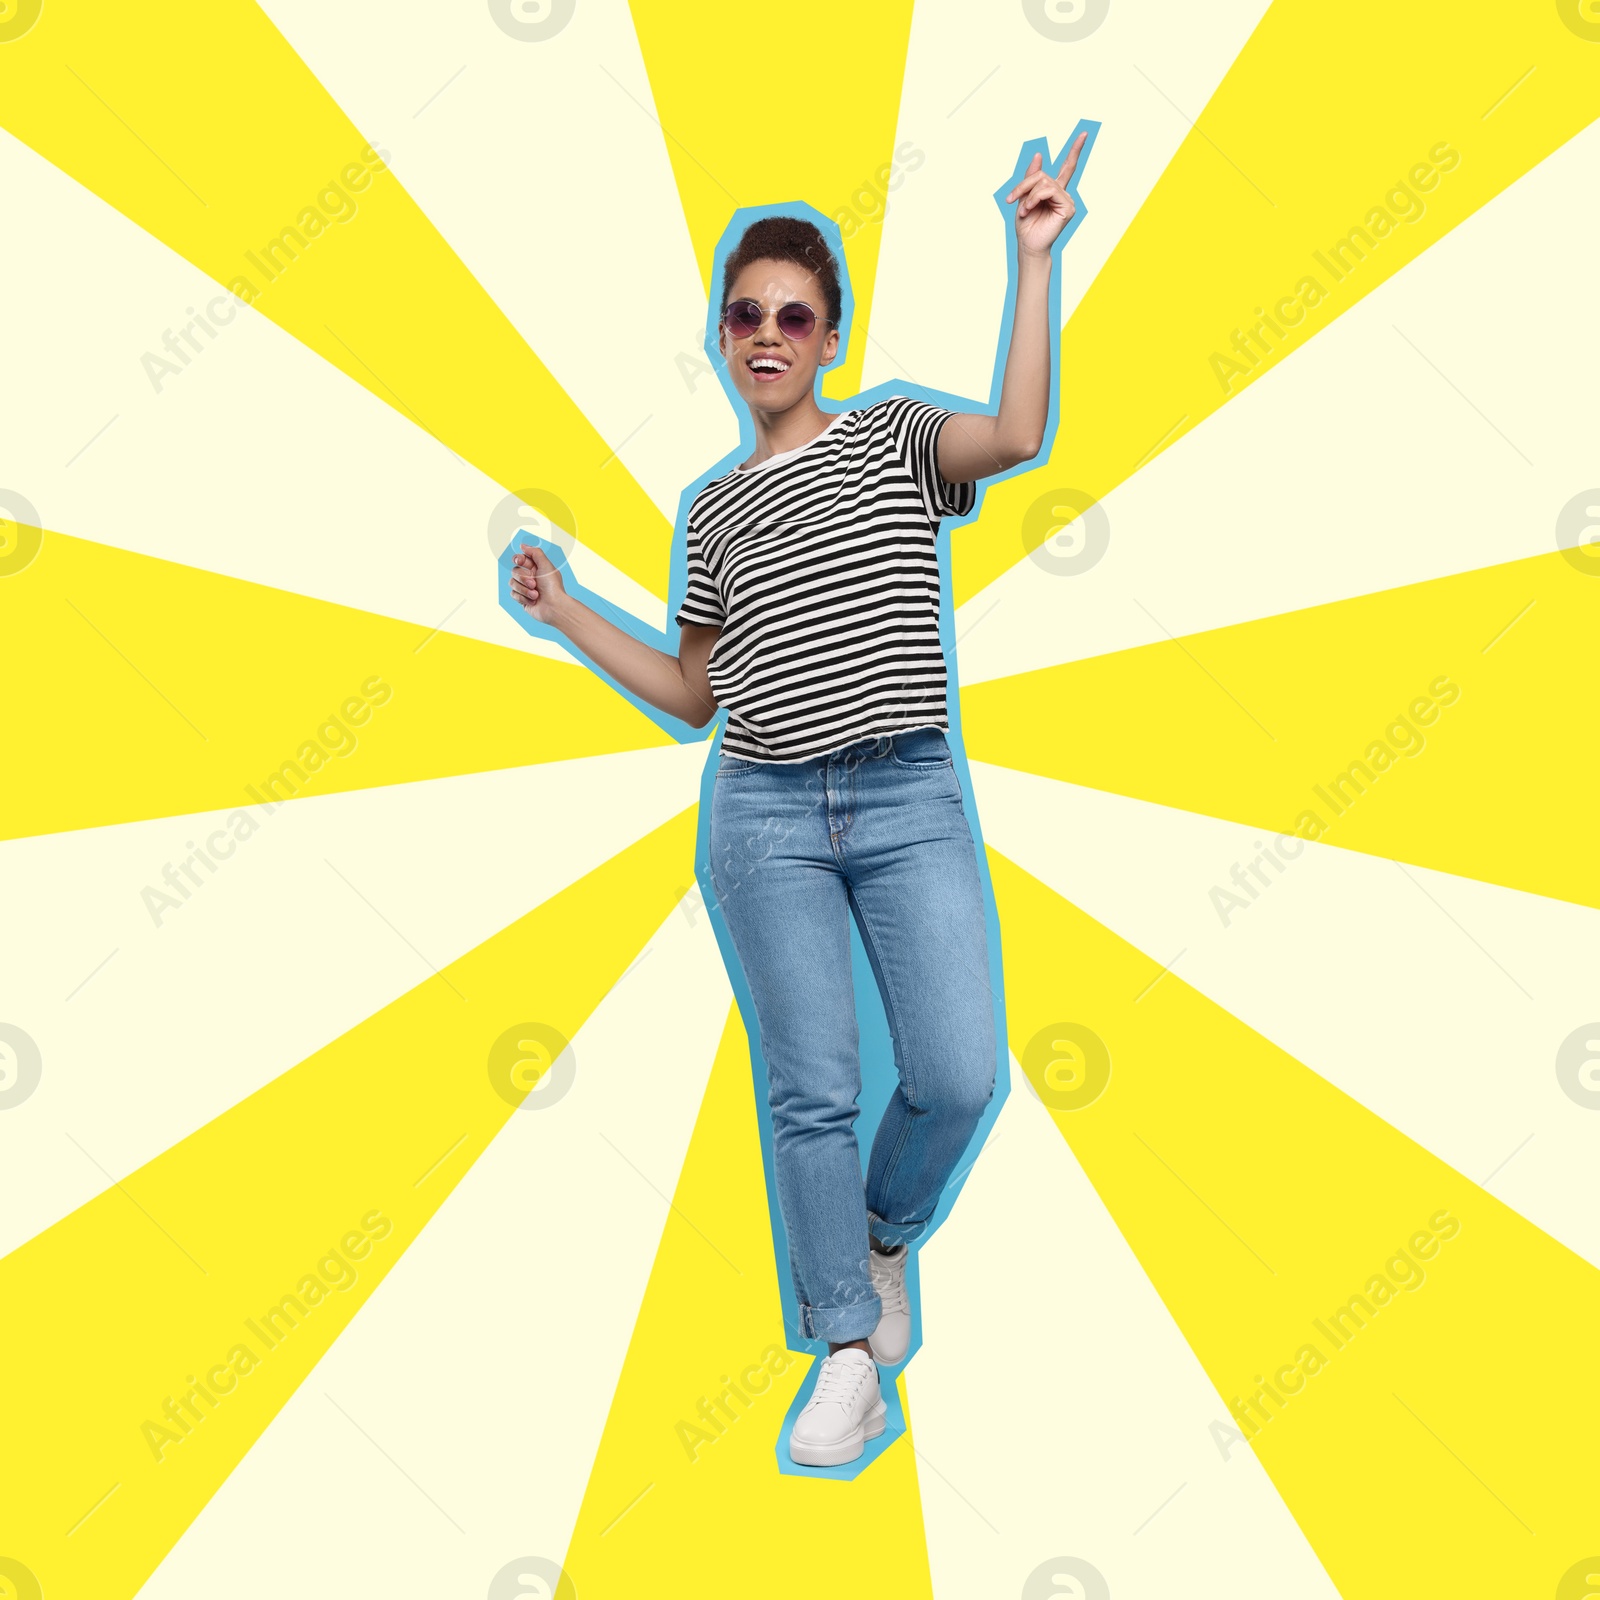 Image of Pop art poster. Happy young woman in sunglasses dancing on color background